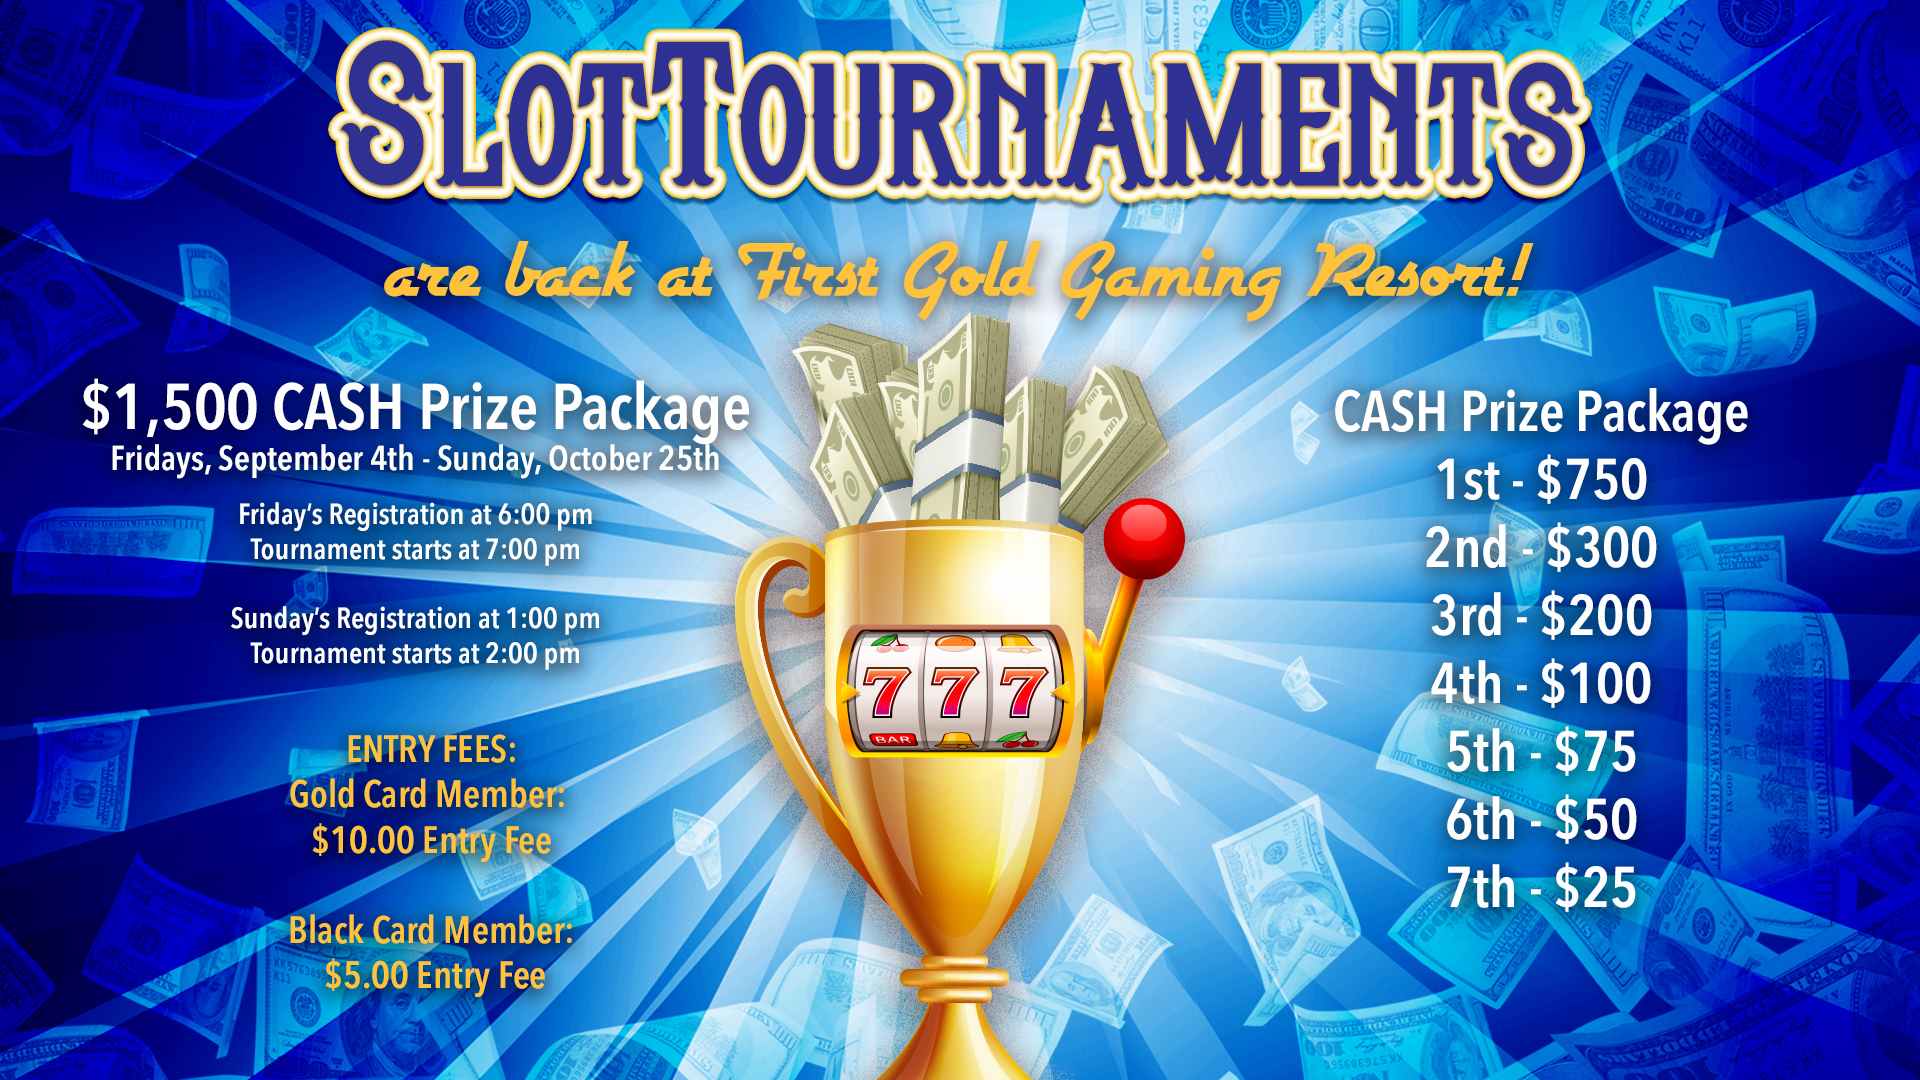 Slot Tournaments Are Back! Promotions First Gold Gaming Resort